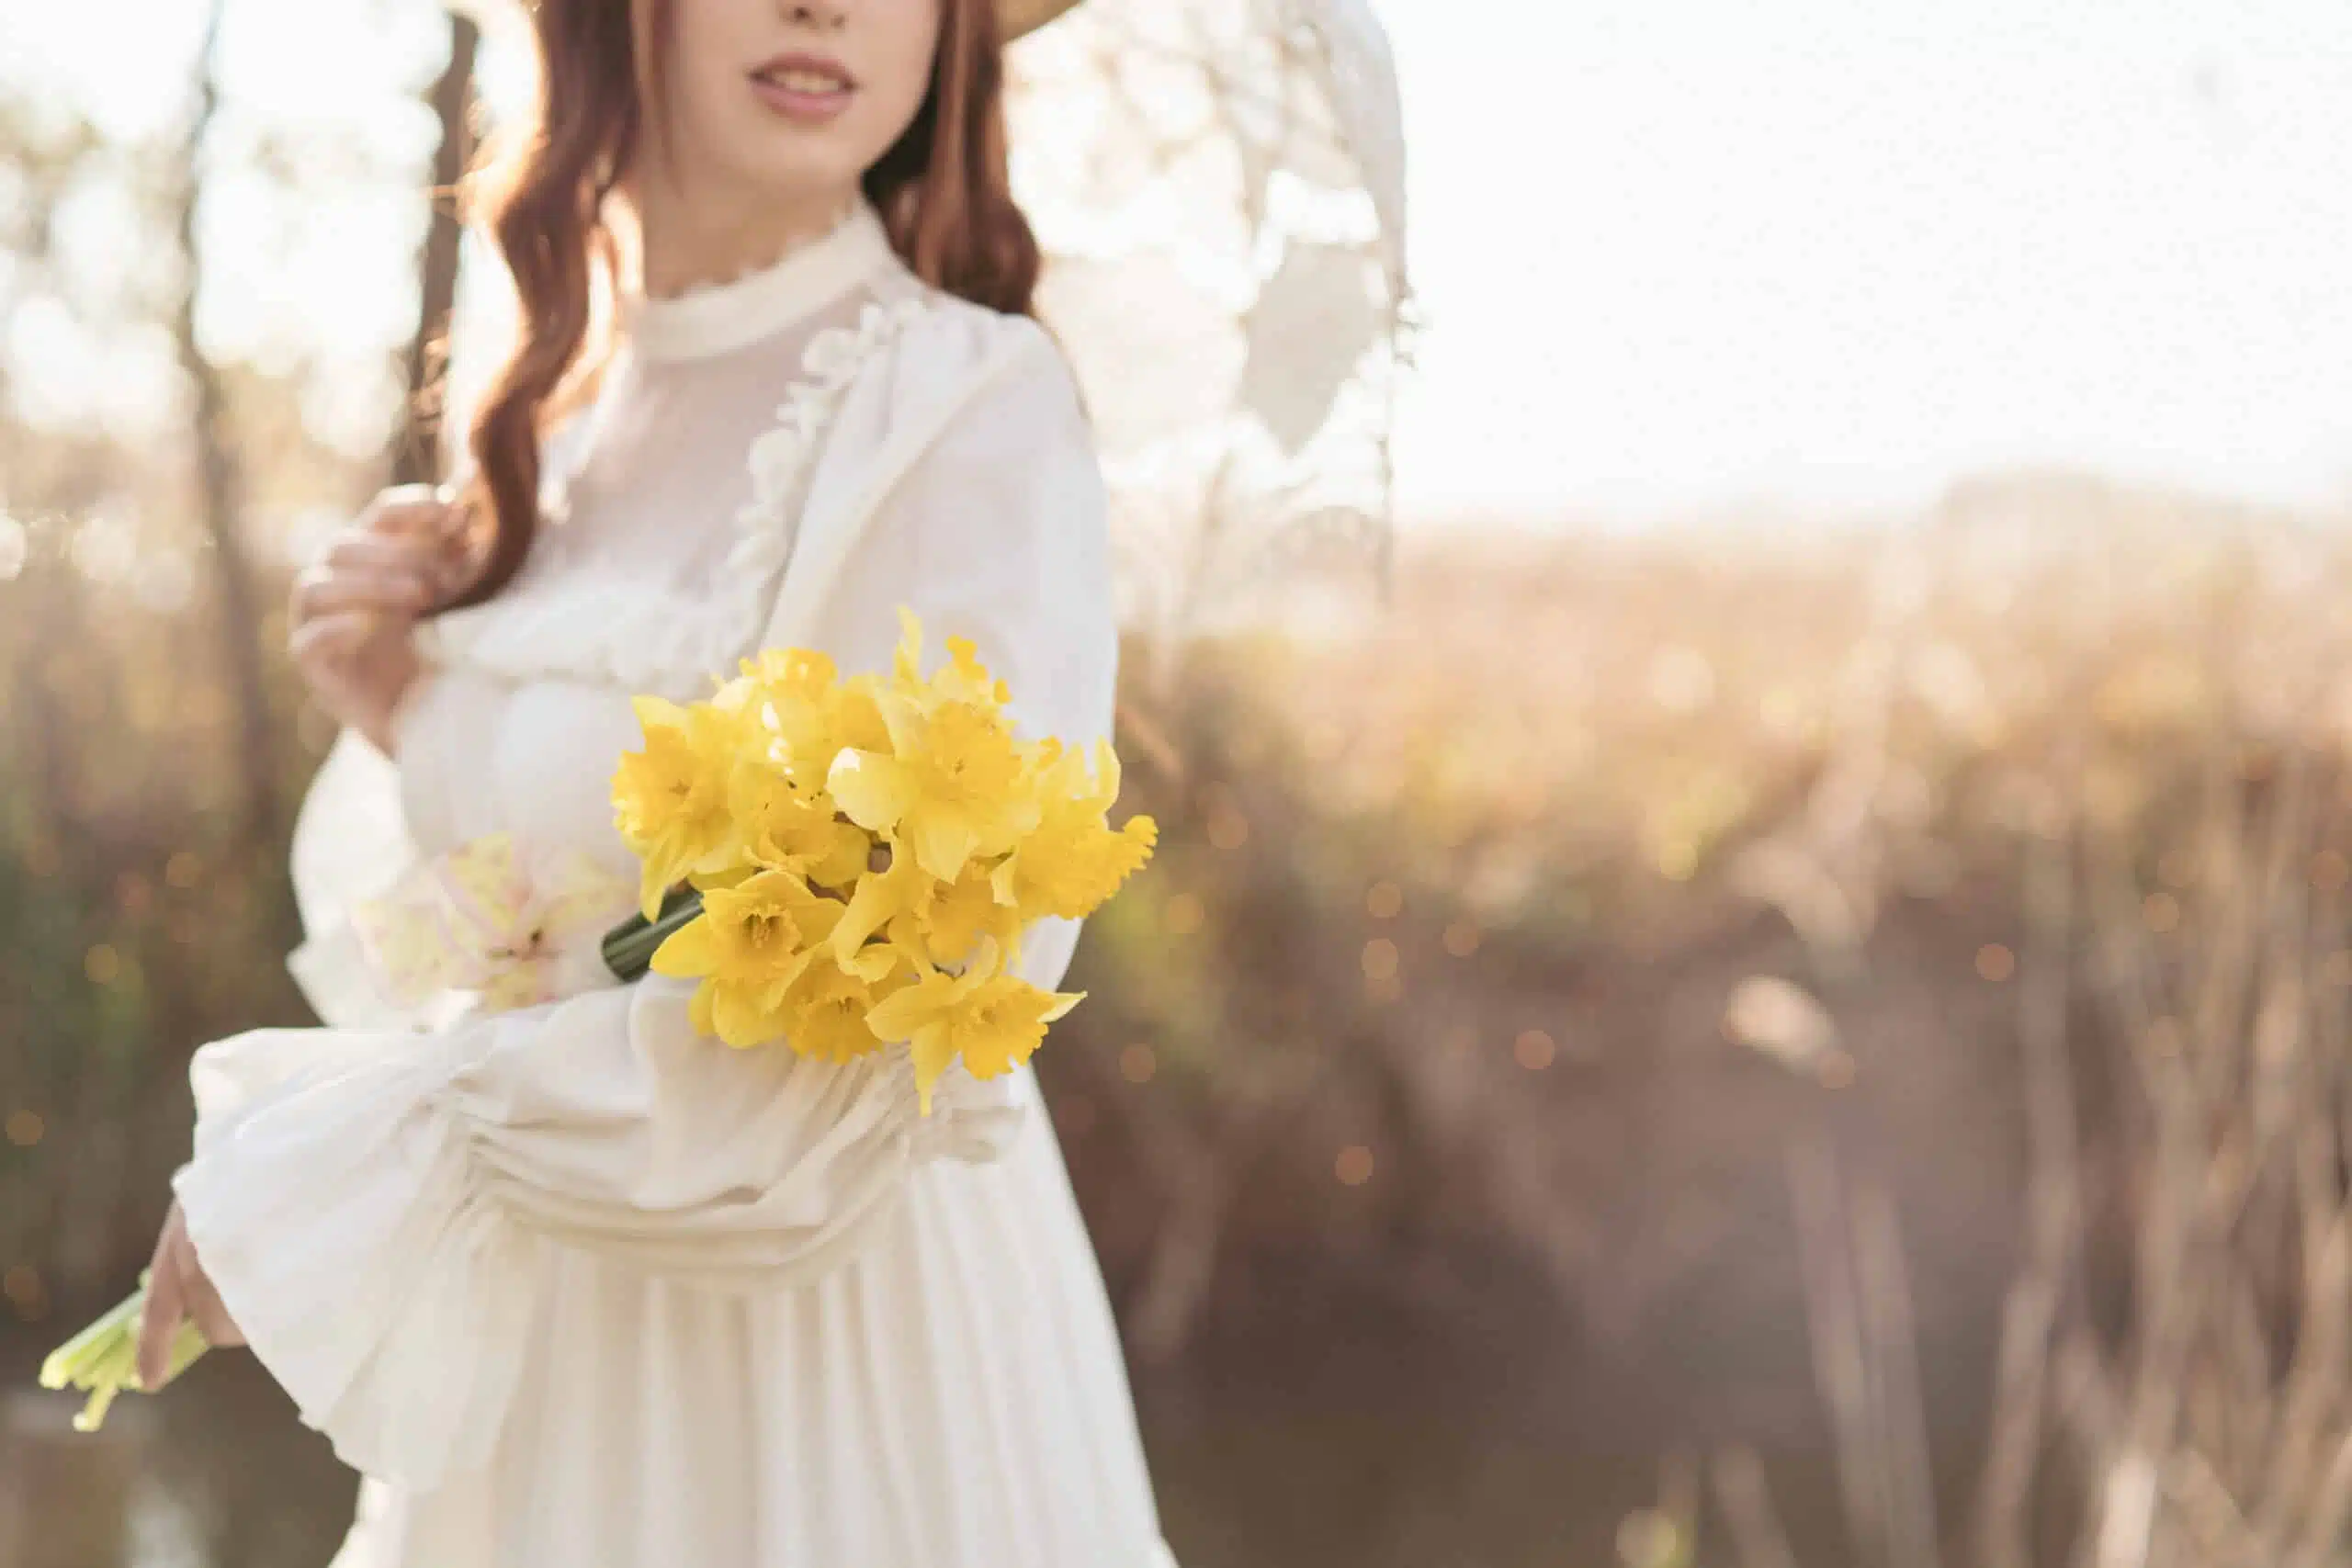 young woman holding yellow flowers outdoor.